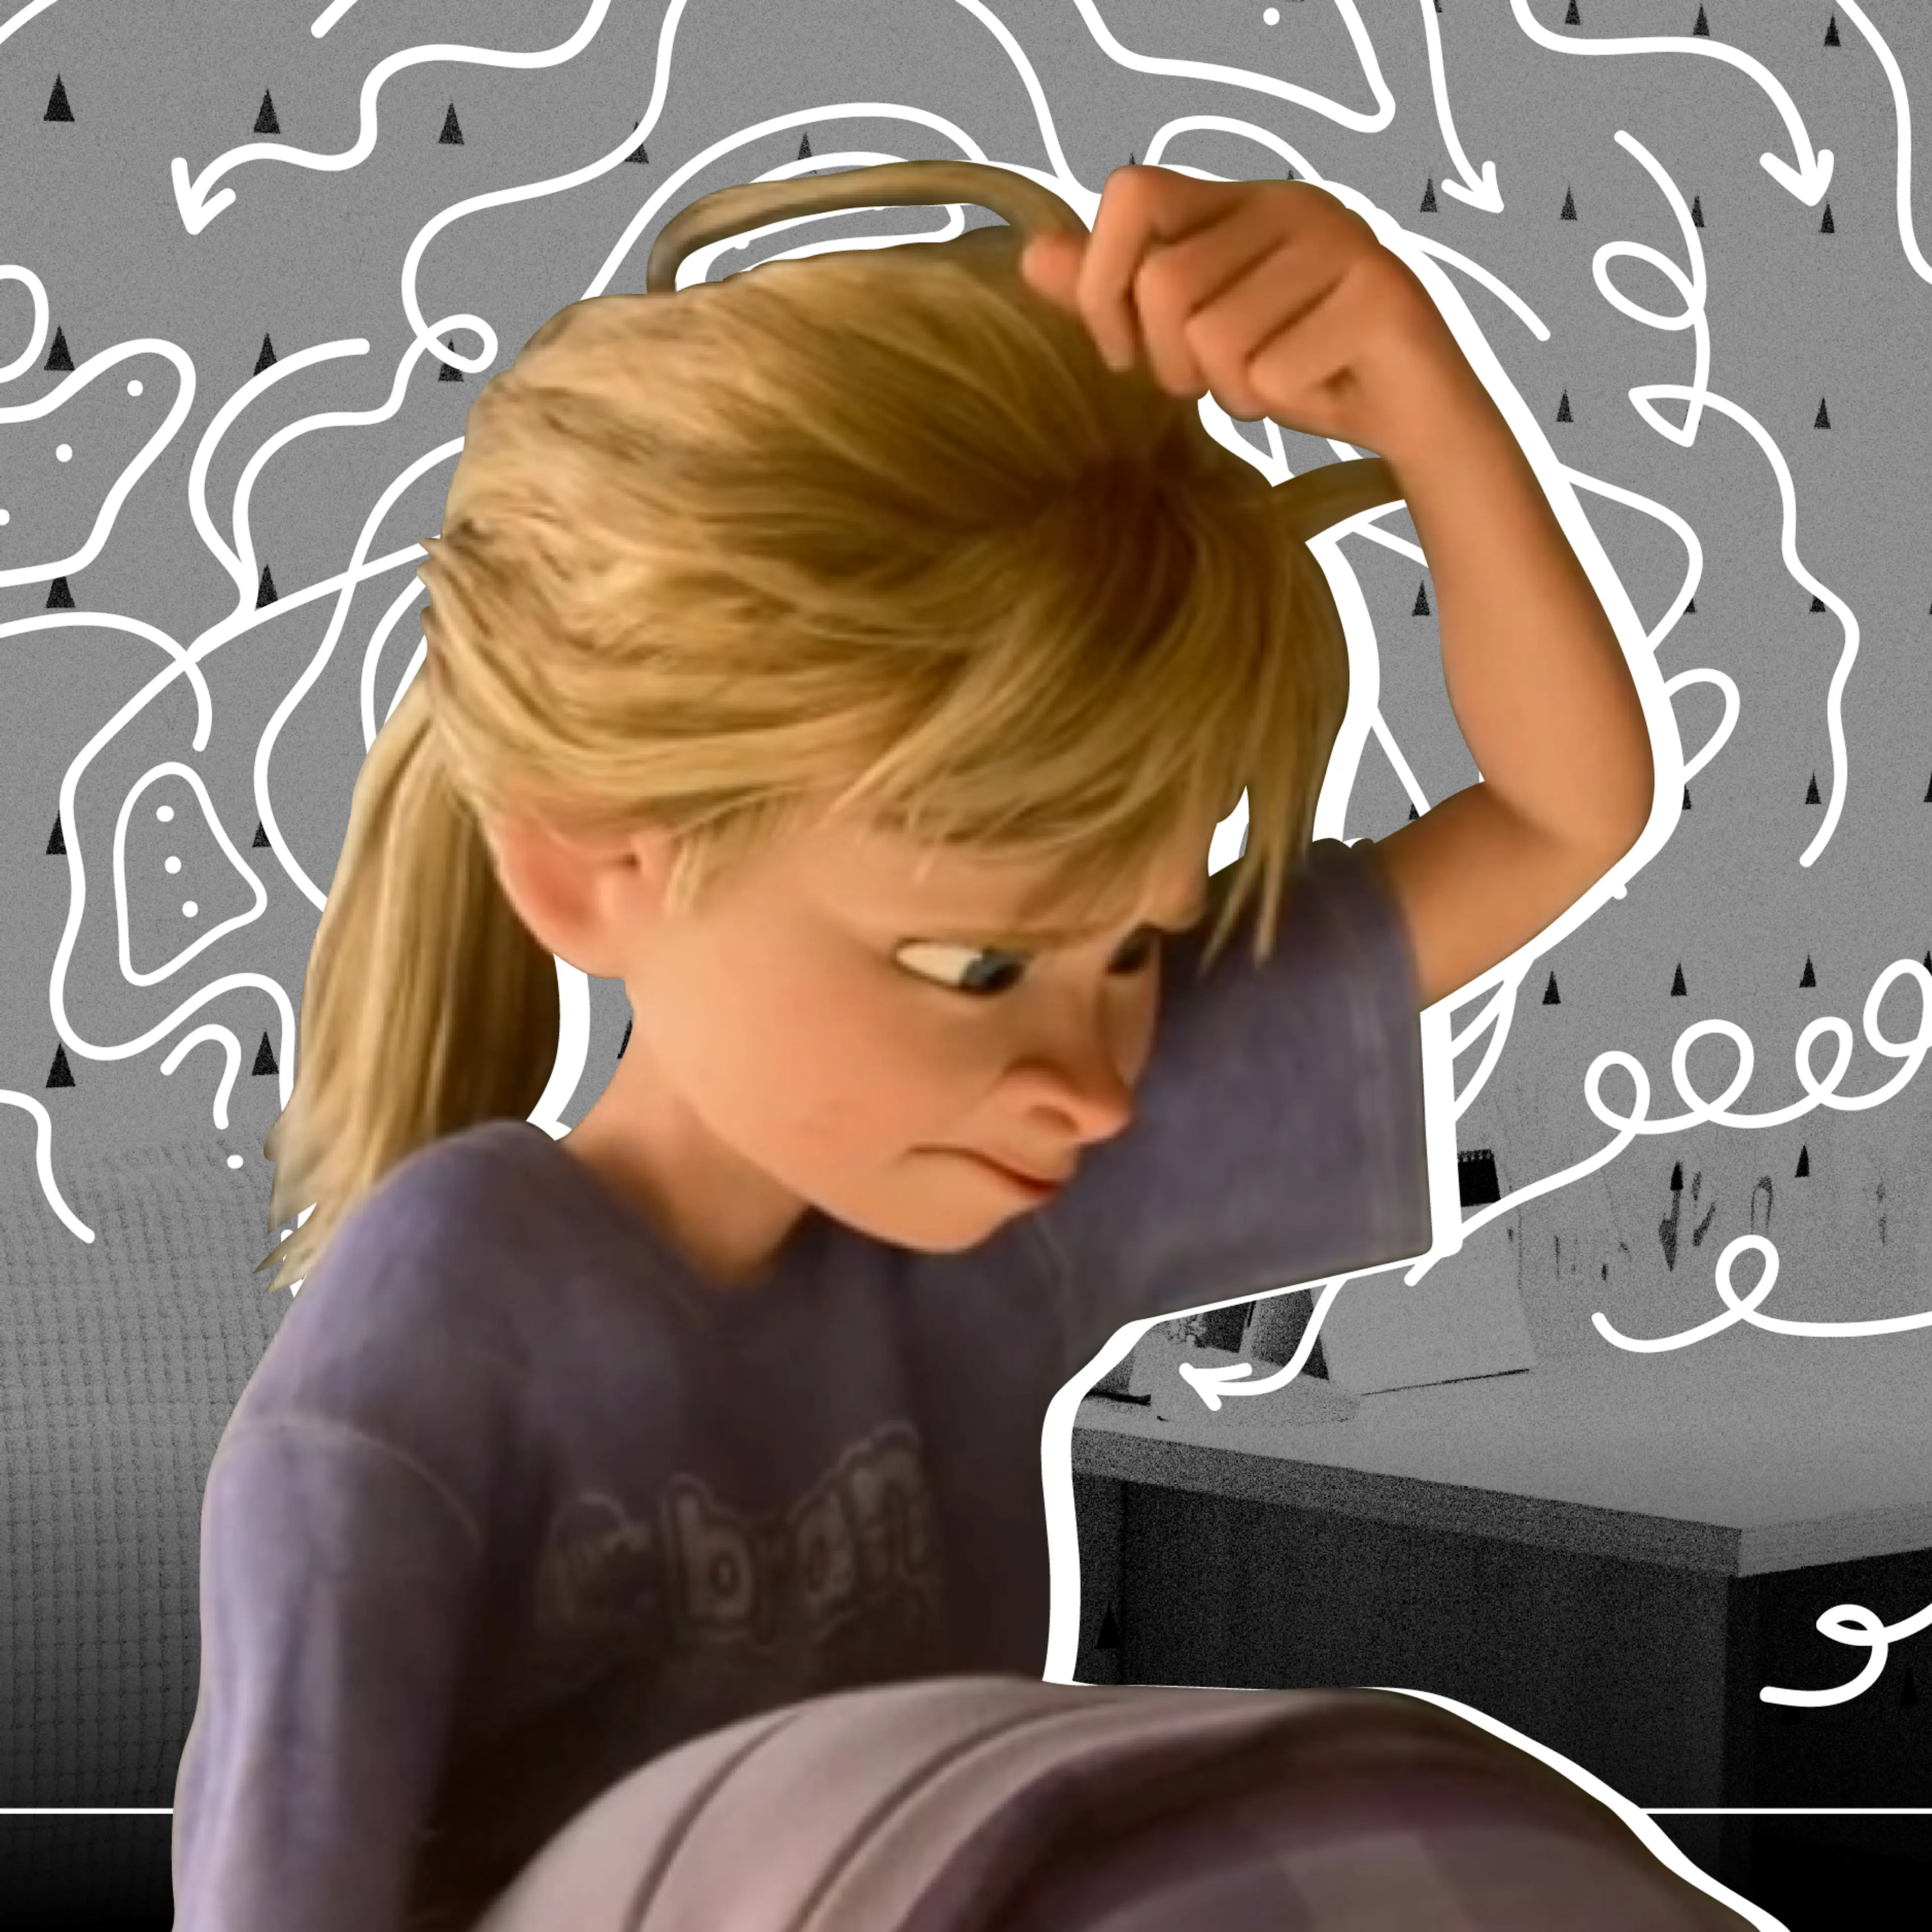 Inside Out 2 turns the spotlight on anxiety as a dominant emotion in teens 